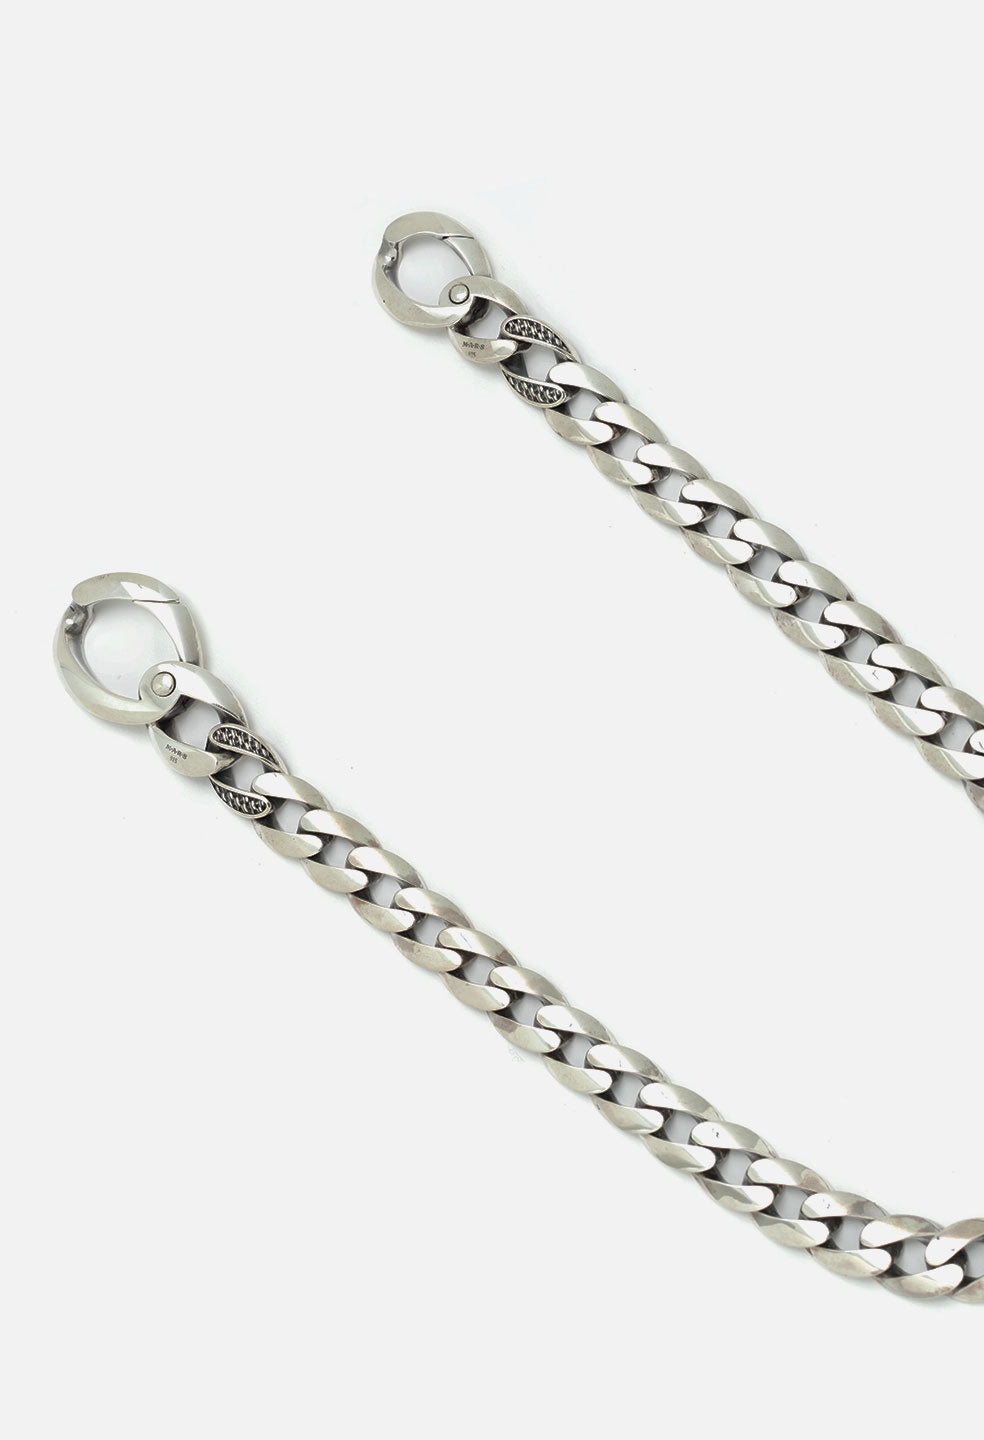 M.A.R.S WALLET CHAIN - 2